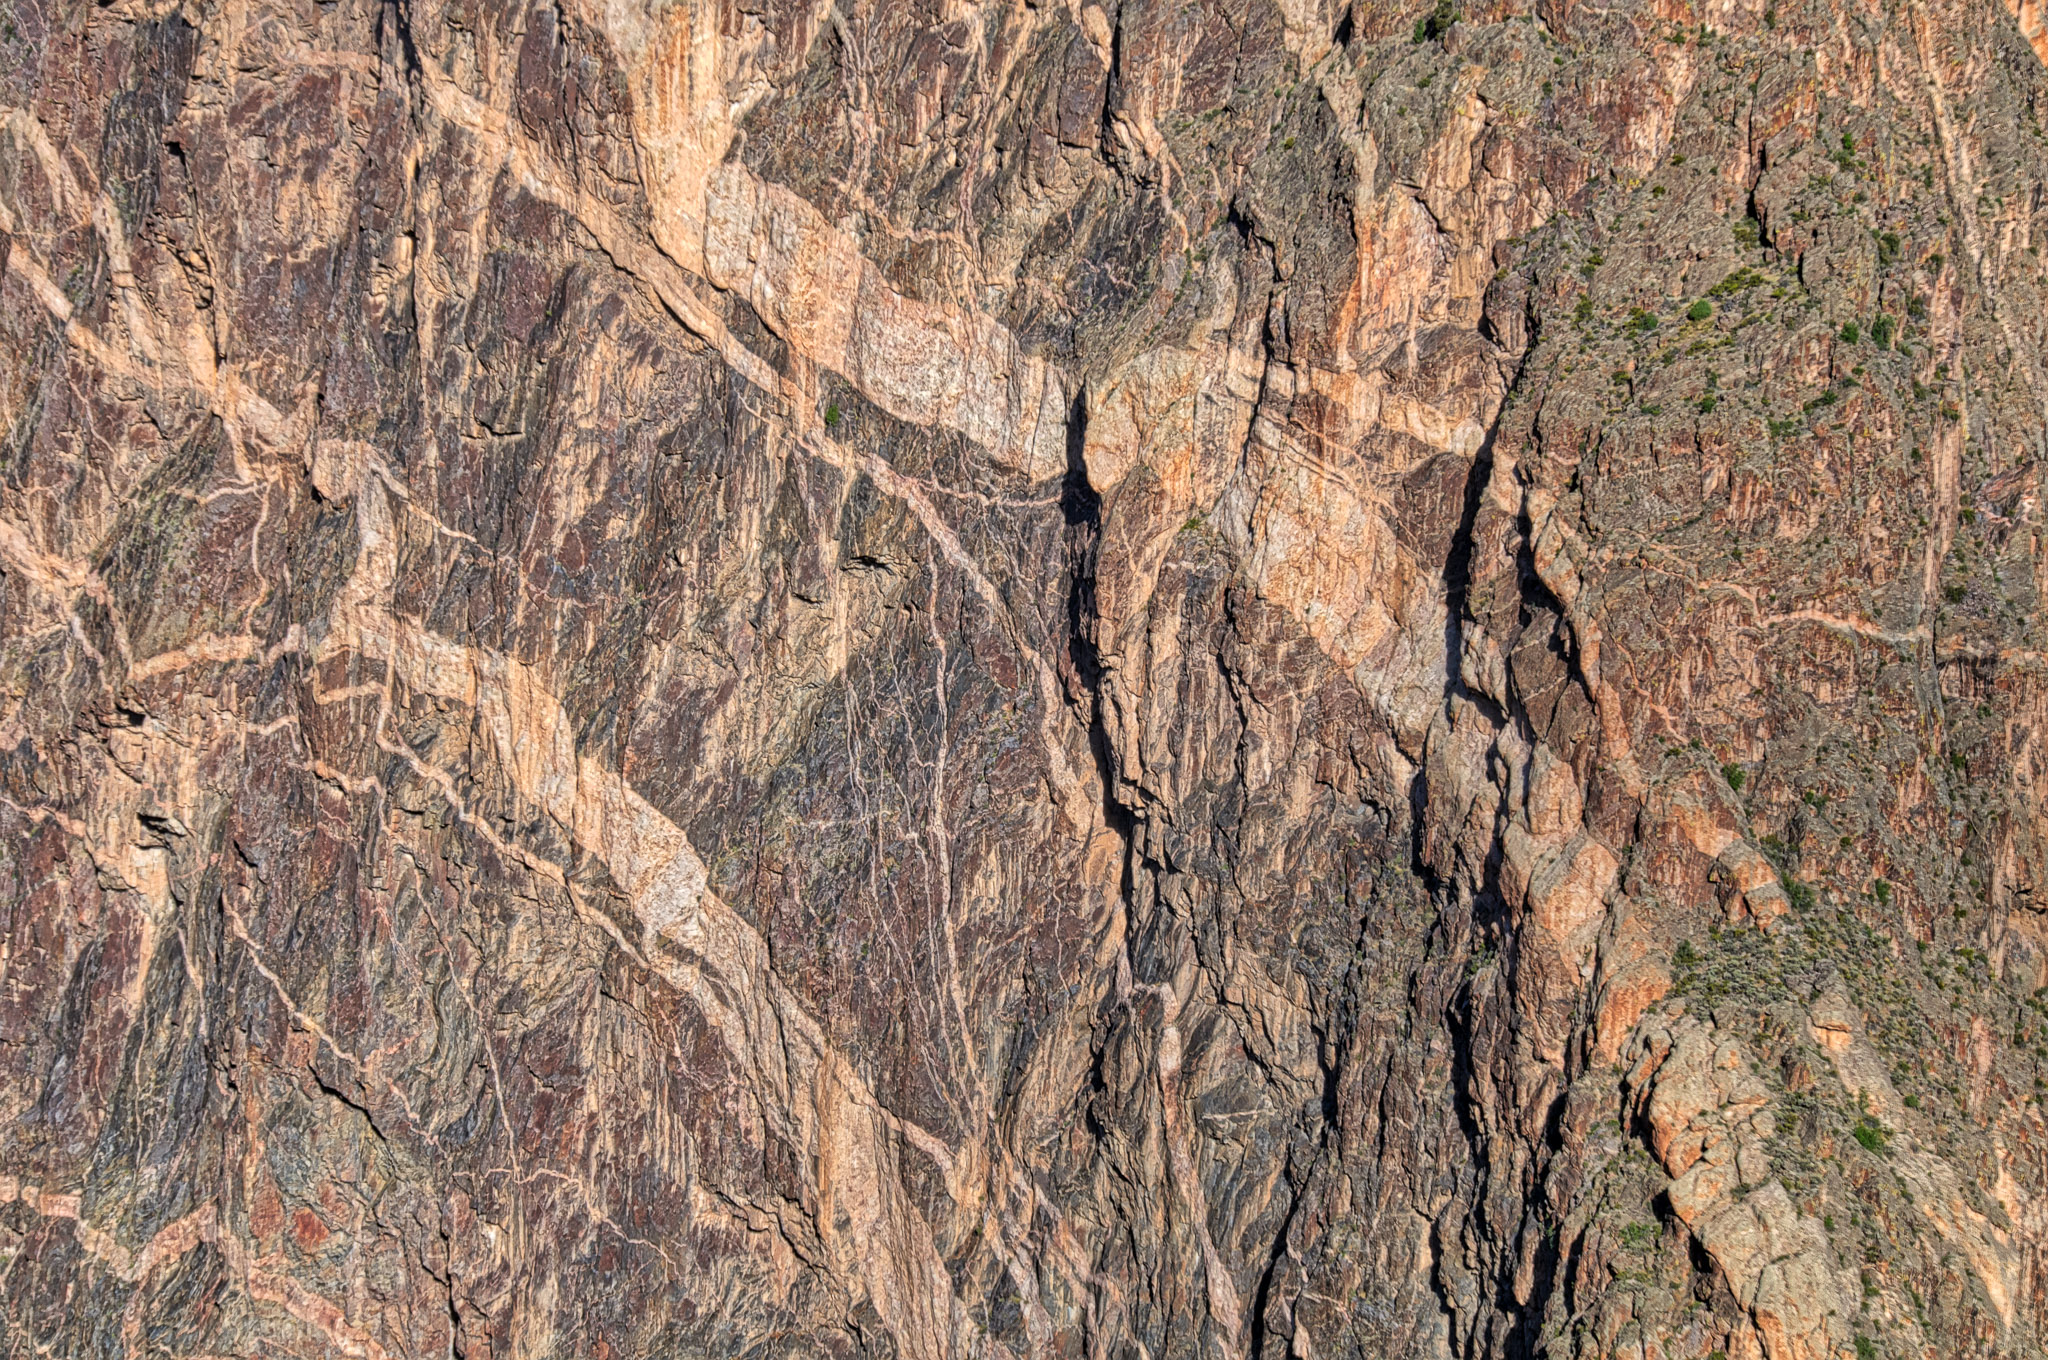 This is a detail of the feldspar pegmatites intruded into the 1.8 billion-year-old gneiss of the Painted Wall. taken from Dragon Point in Black Canyon of the Gunnison National Park near Montrose, Colorado.